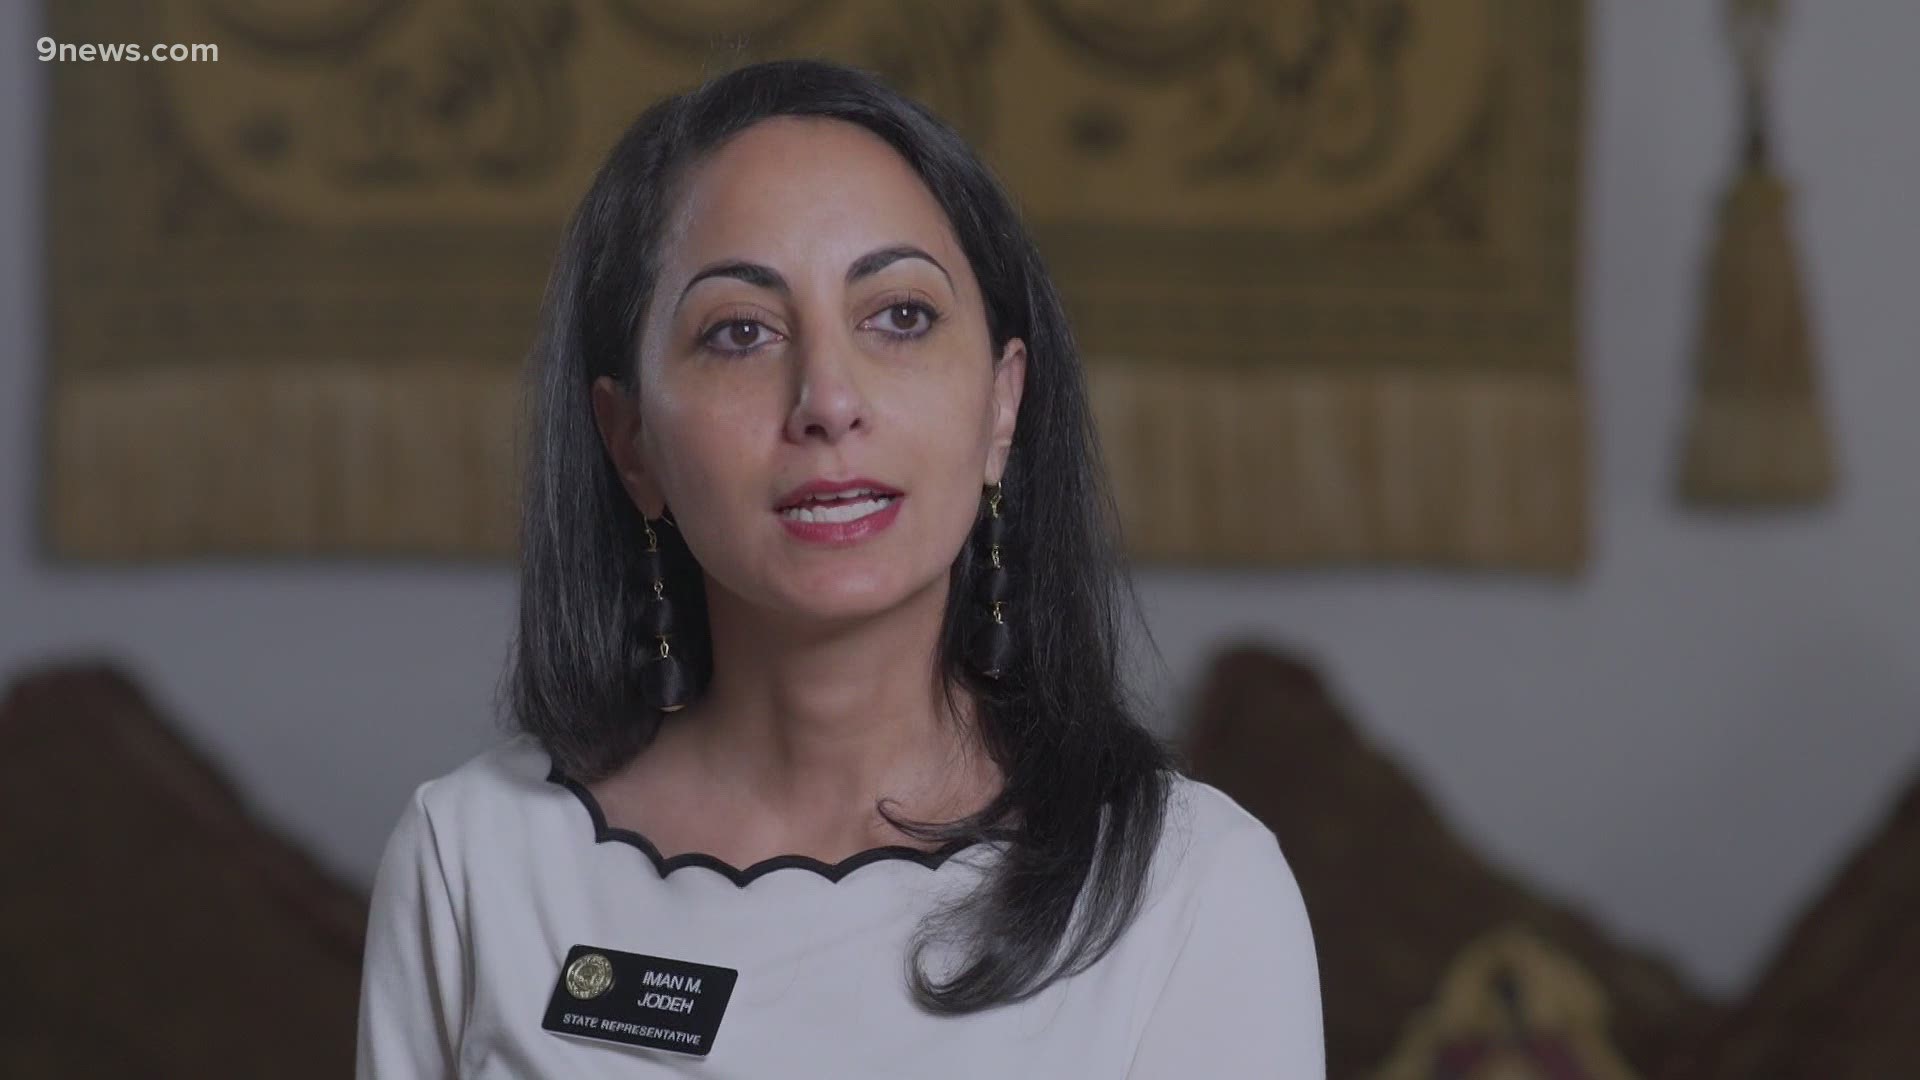 The state's first Muslim lawmaker explains how her name and heritage play key roles in her life and legislative work.